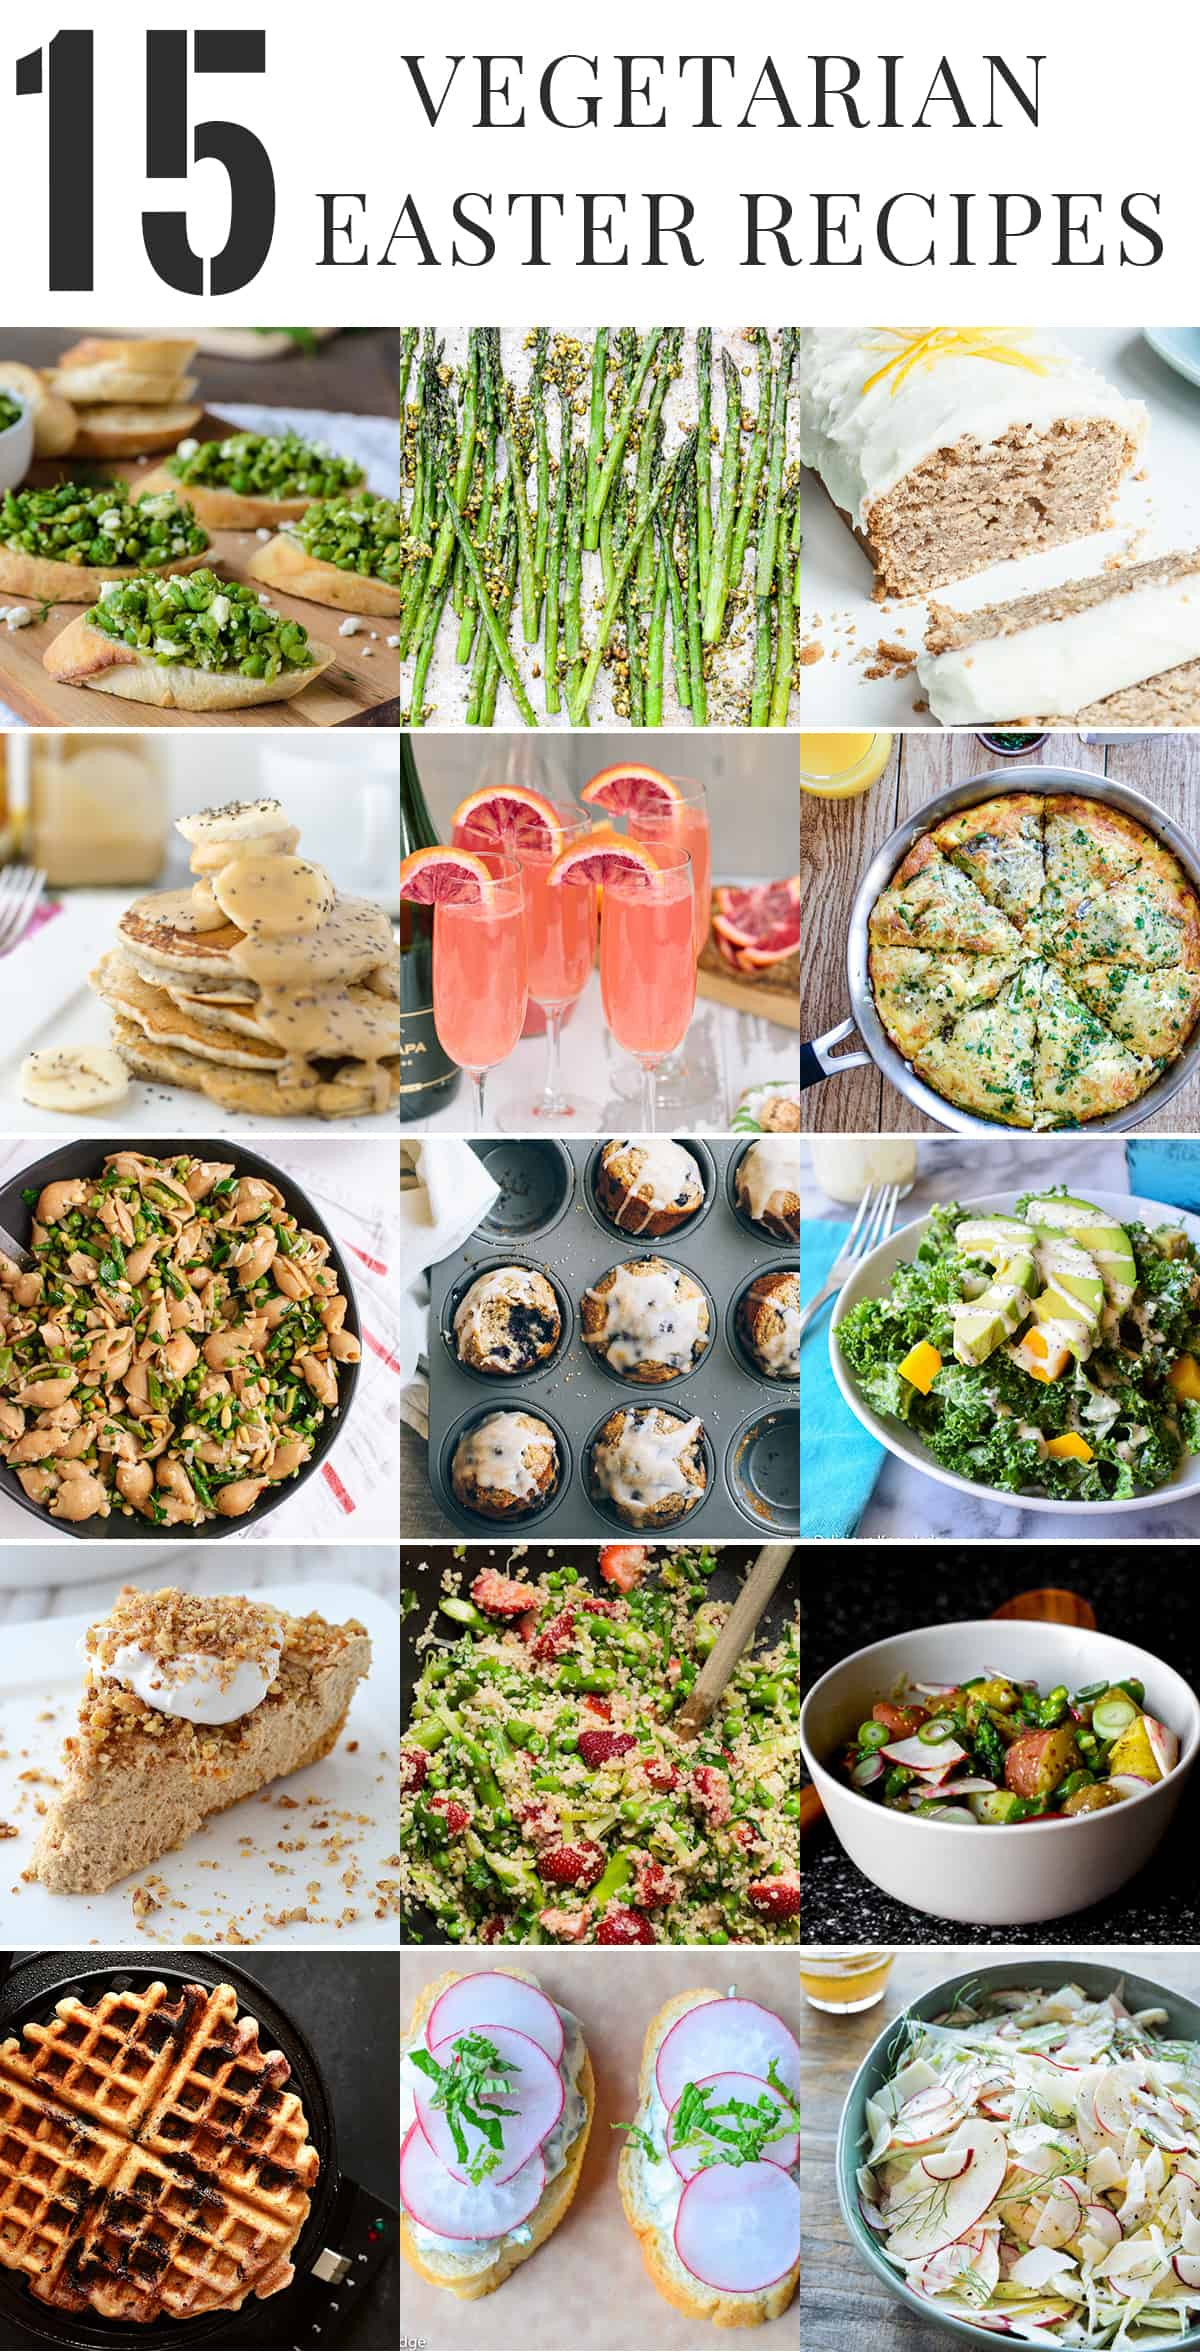 Easter Vegetarian Recipes
 Healthy Ve arian Easter Recipes Delish Knowledge